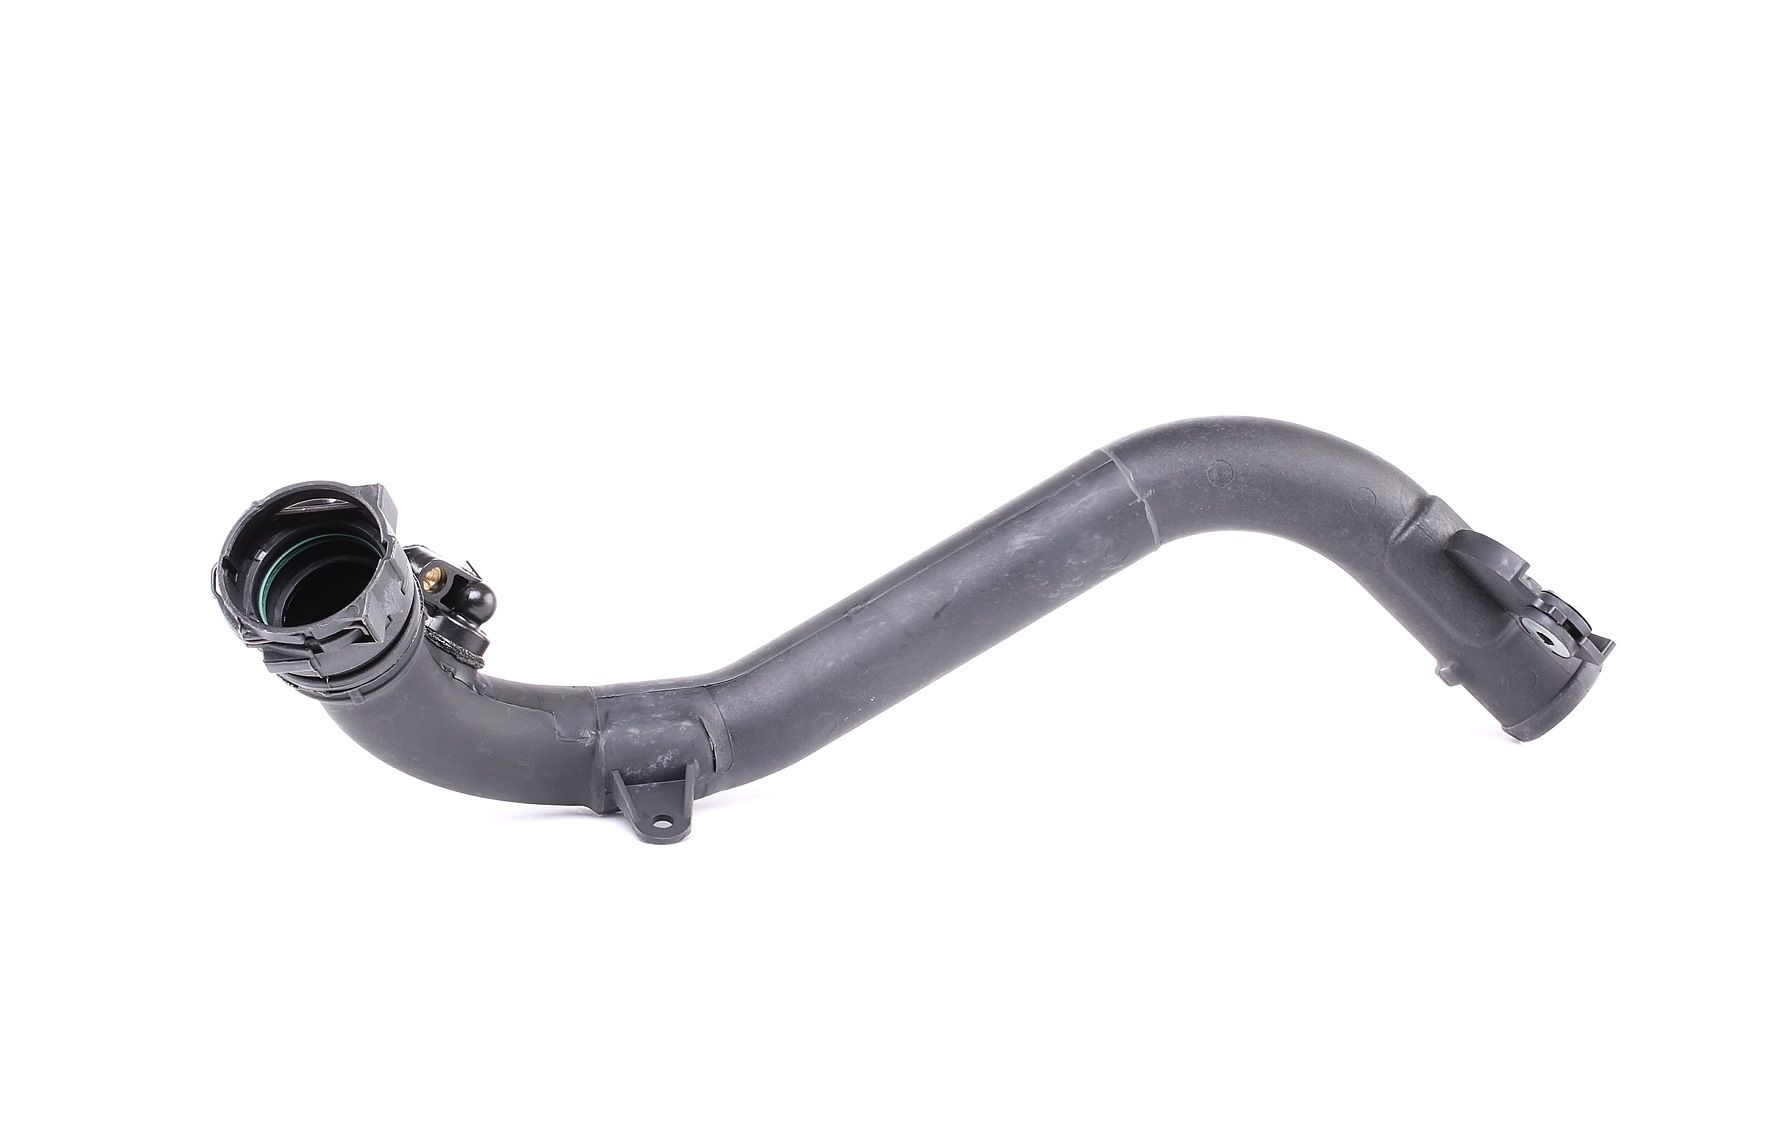 Nissan Pipes and hoses parts - Charger Intake Hose GATES 09-0891